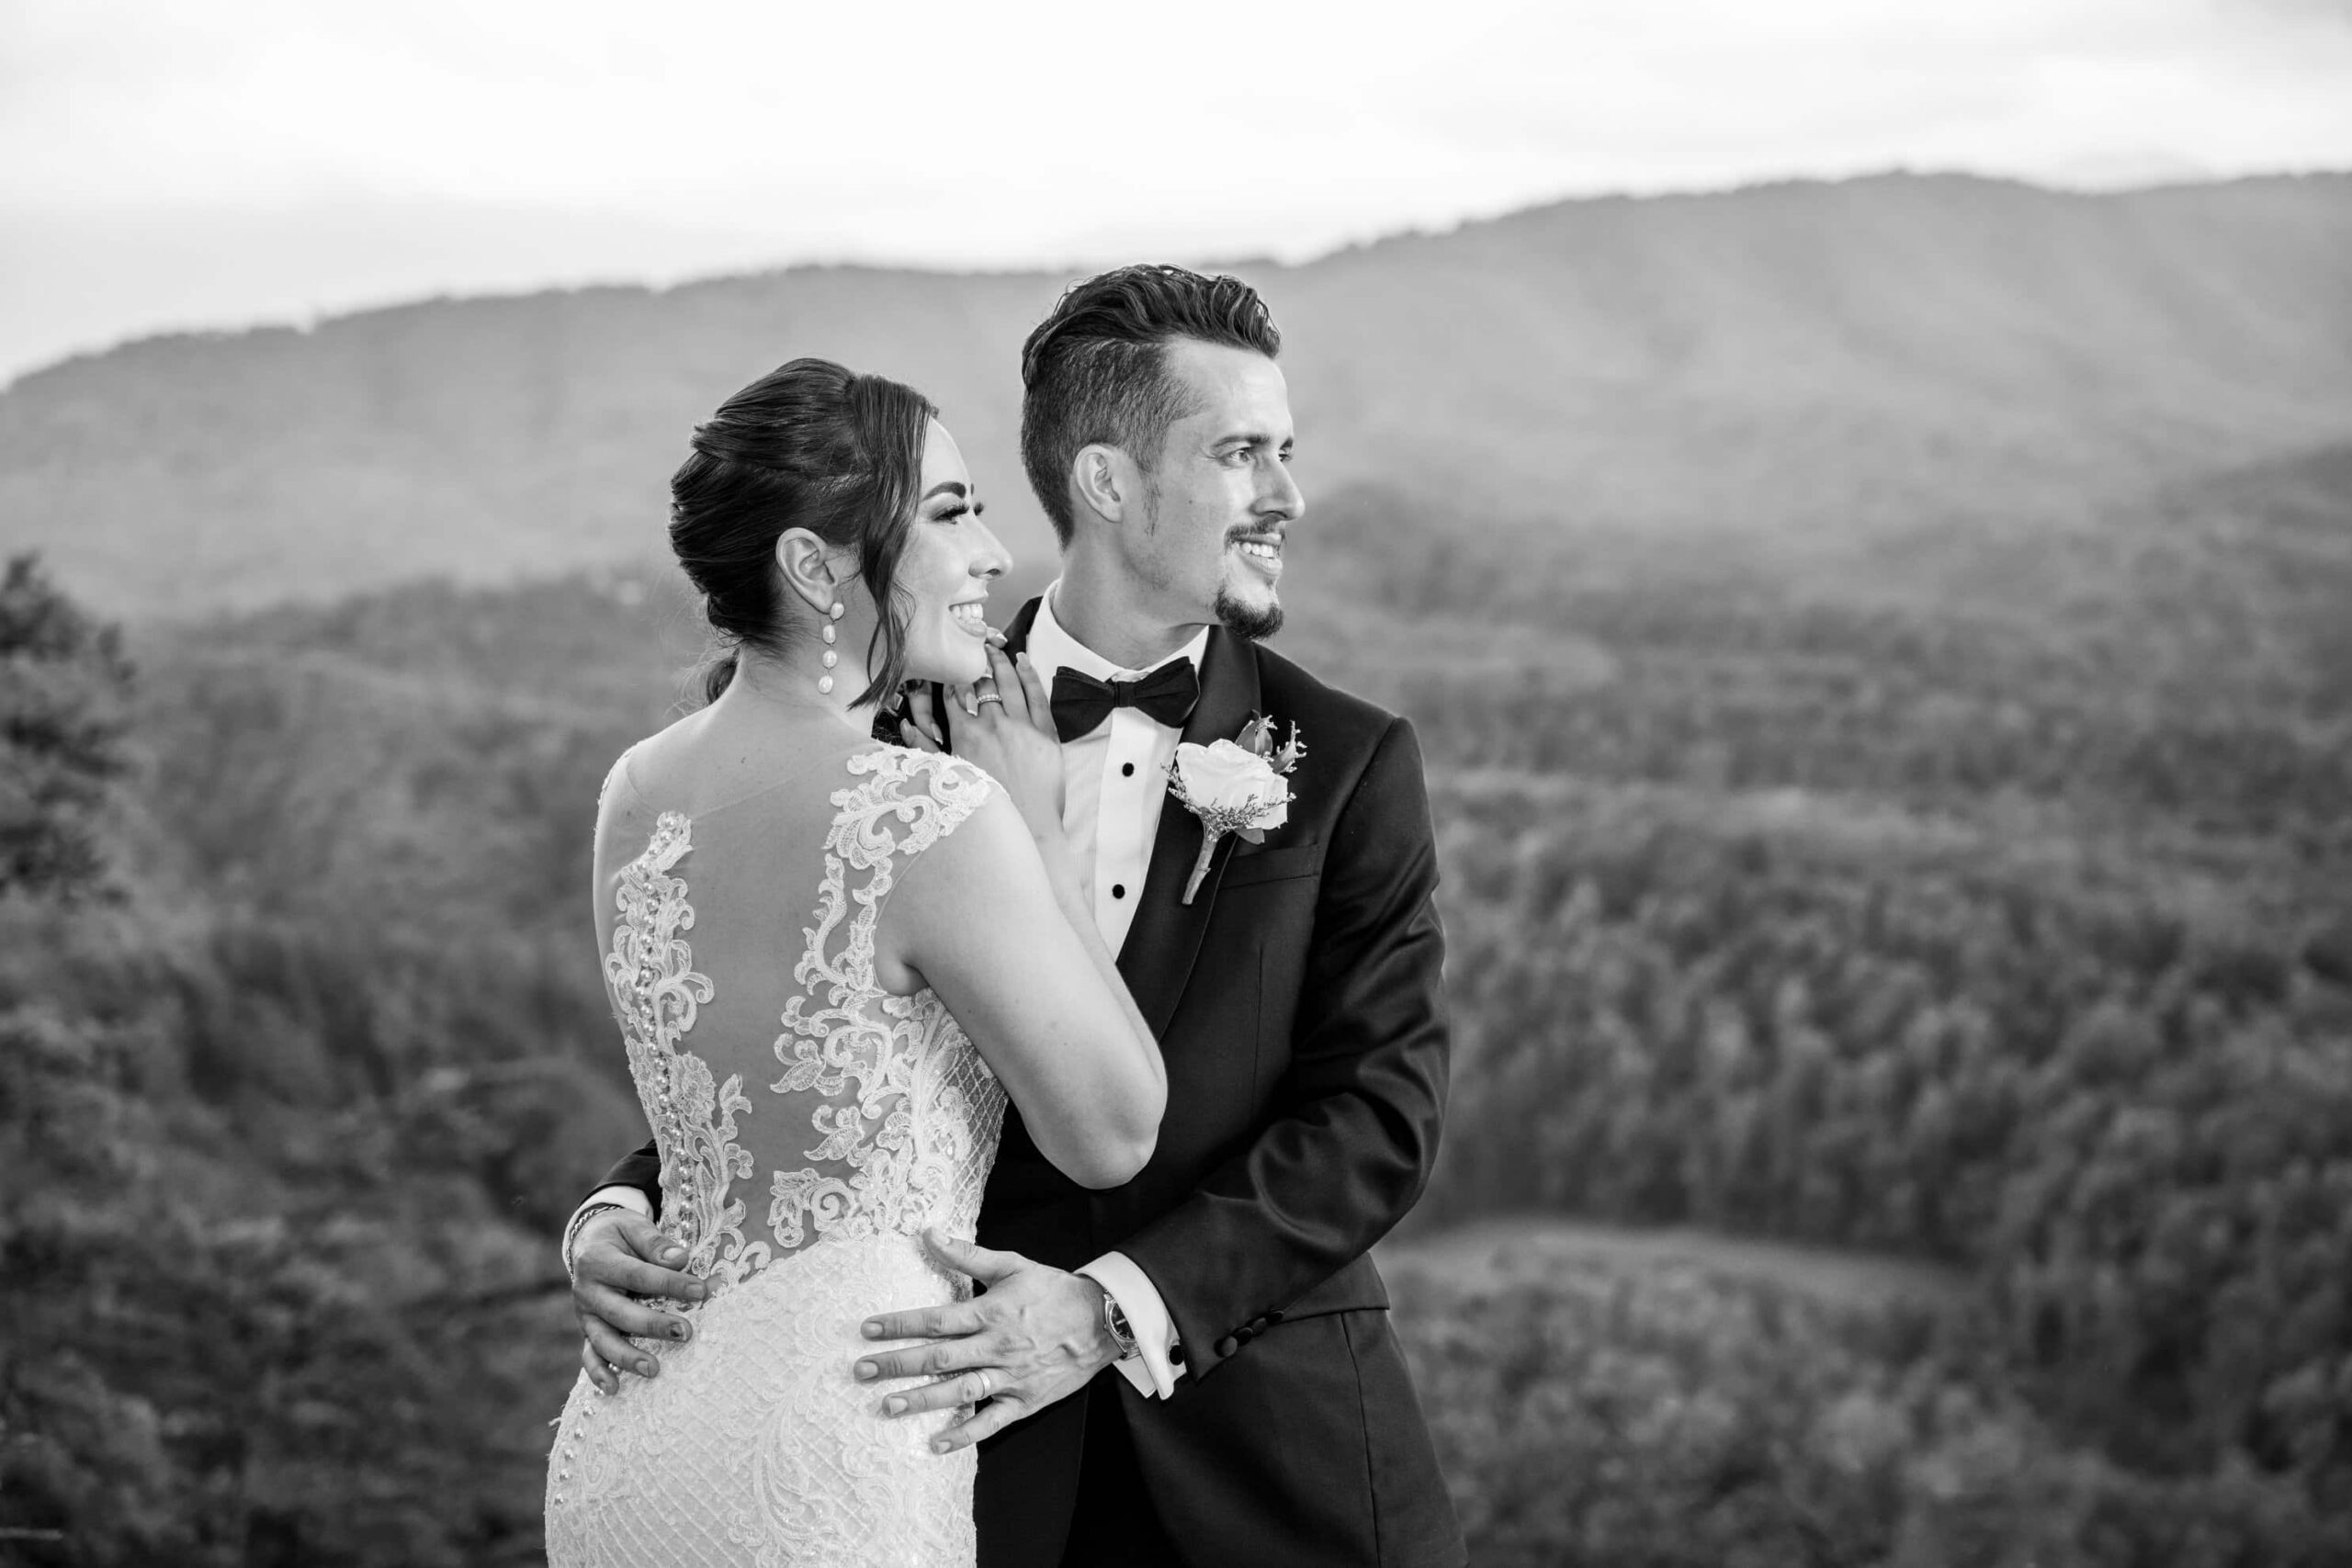 Black and white portrait of a bride and groom at their wedding in The Smoky Mountains National Park by wedding photographer Tonya Damron Photography